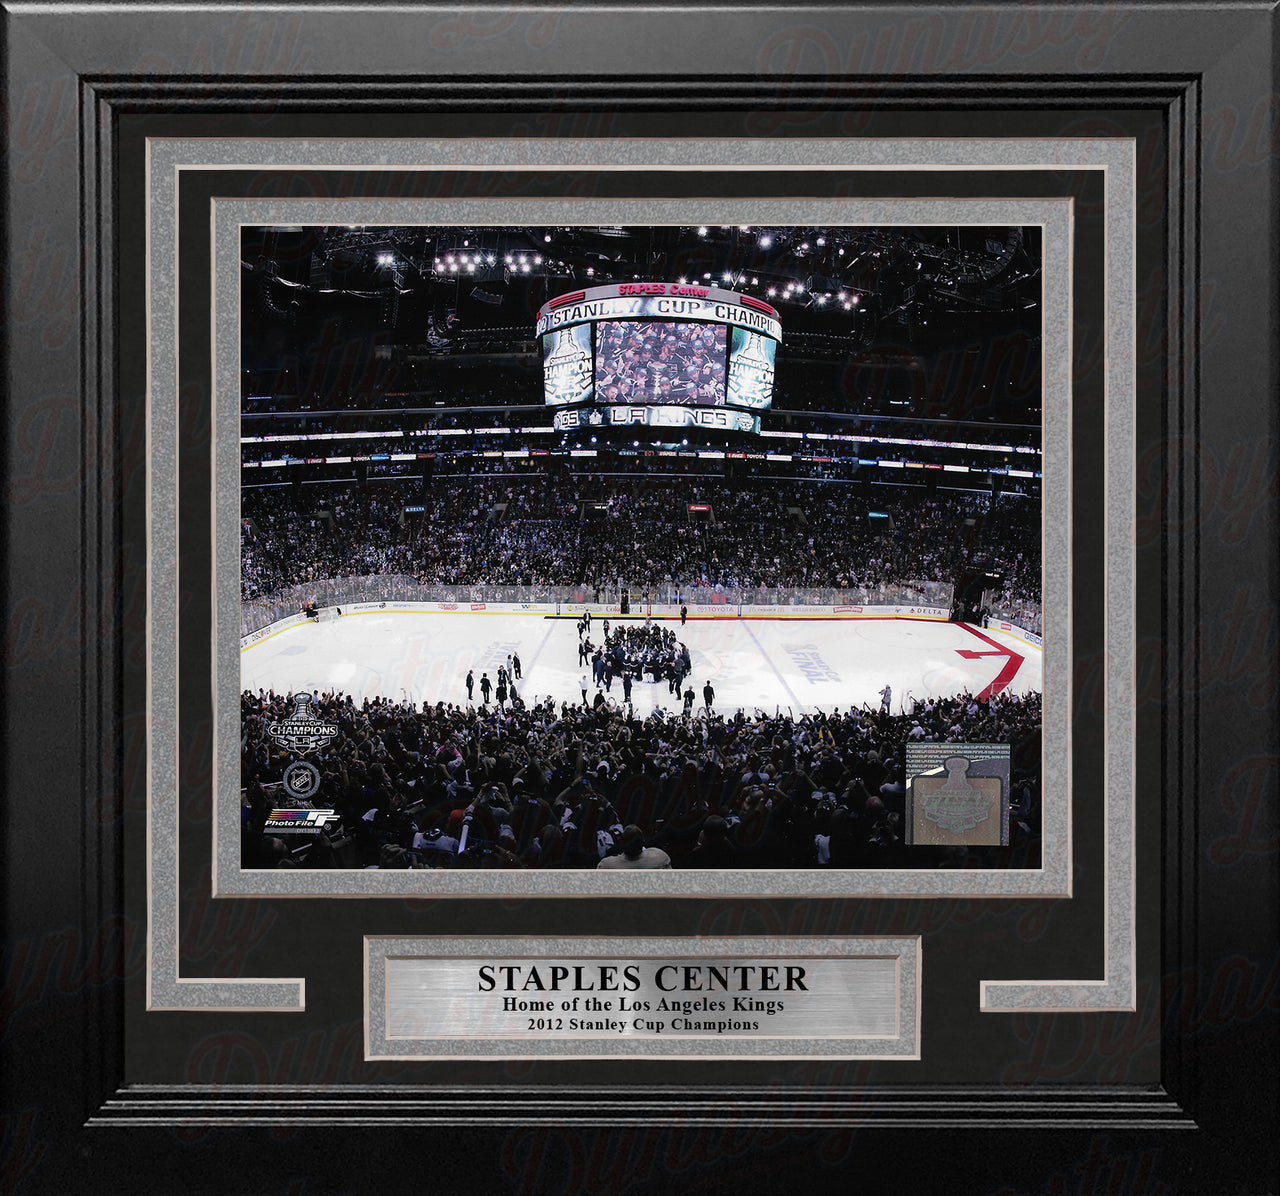 Los Angeles Kings Staples Center 2012 Stanley Cup Champions 8" x 10" Framed Hockey Stadium Photo